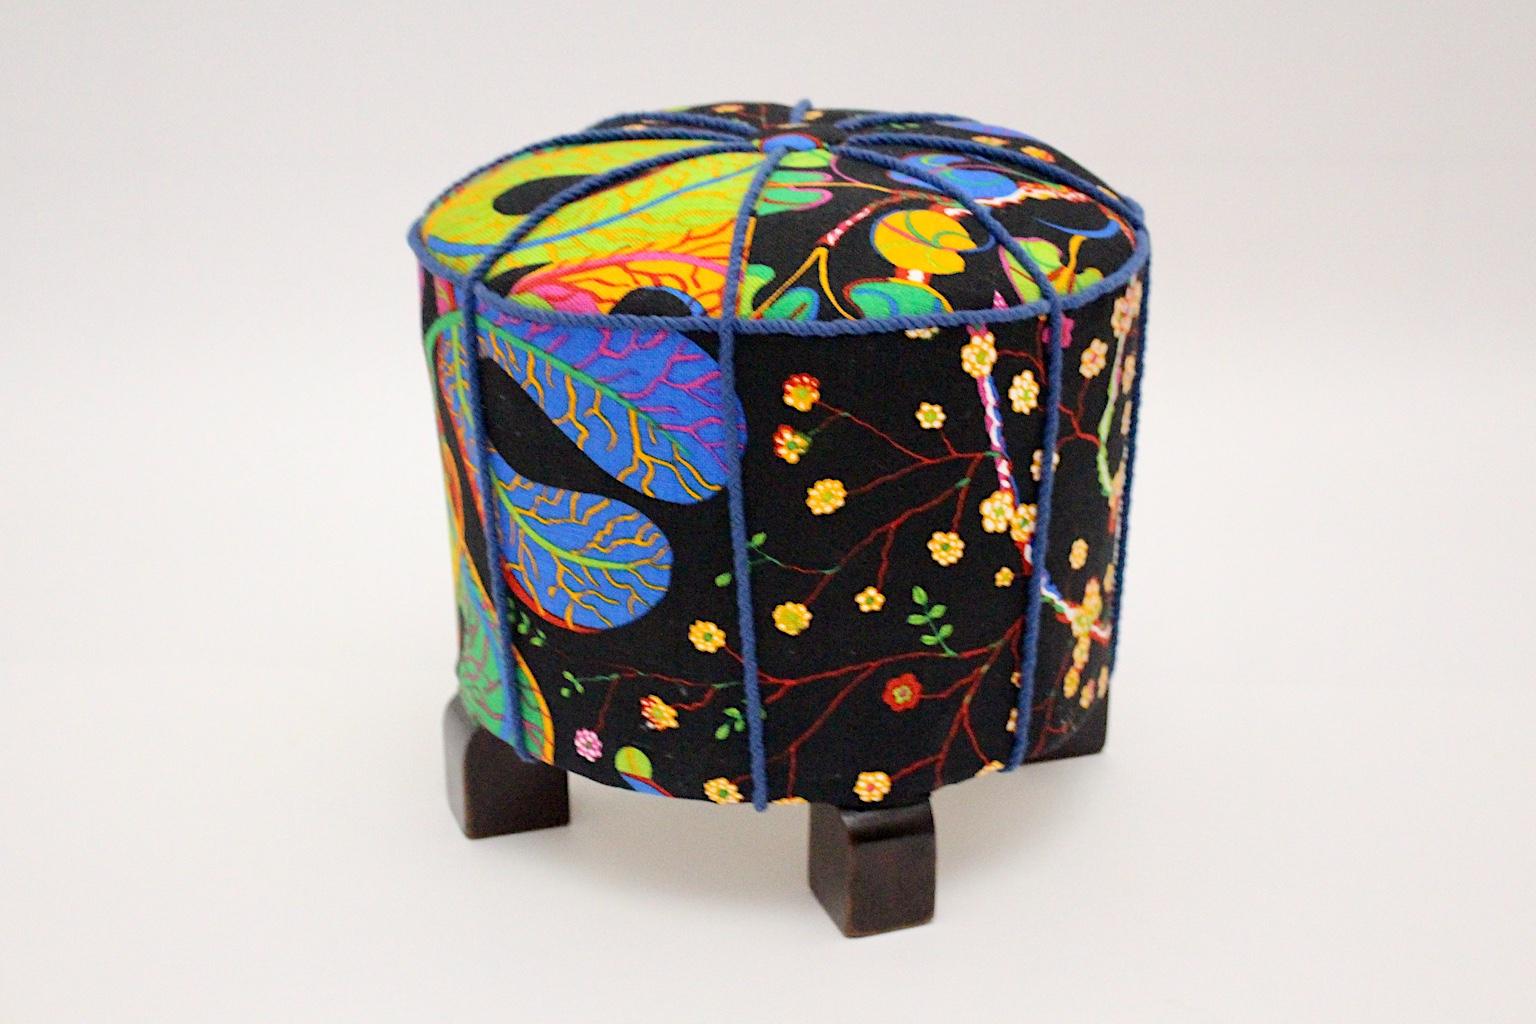 Art Deco Vintage Beech Pouf or Stool with Josef Frank Fabric, 1930s, Austria For Sale 7